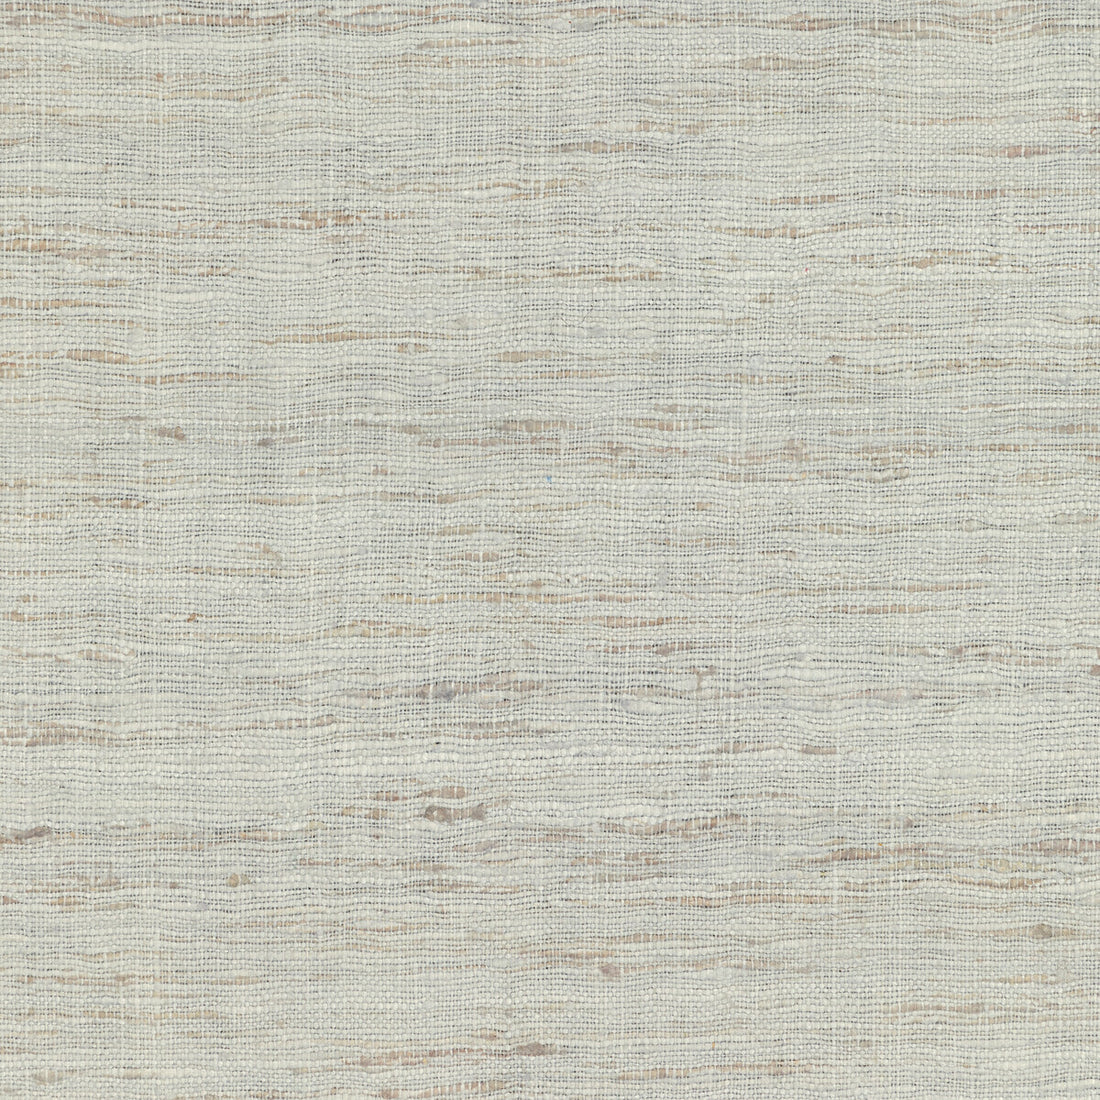 Sonoma fabric in salt color - pattern GWF-3109.1.0 - by Lee Jofa Modern in the Kelly Wearstler VI collection